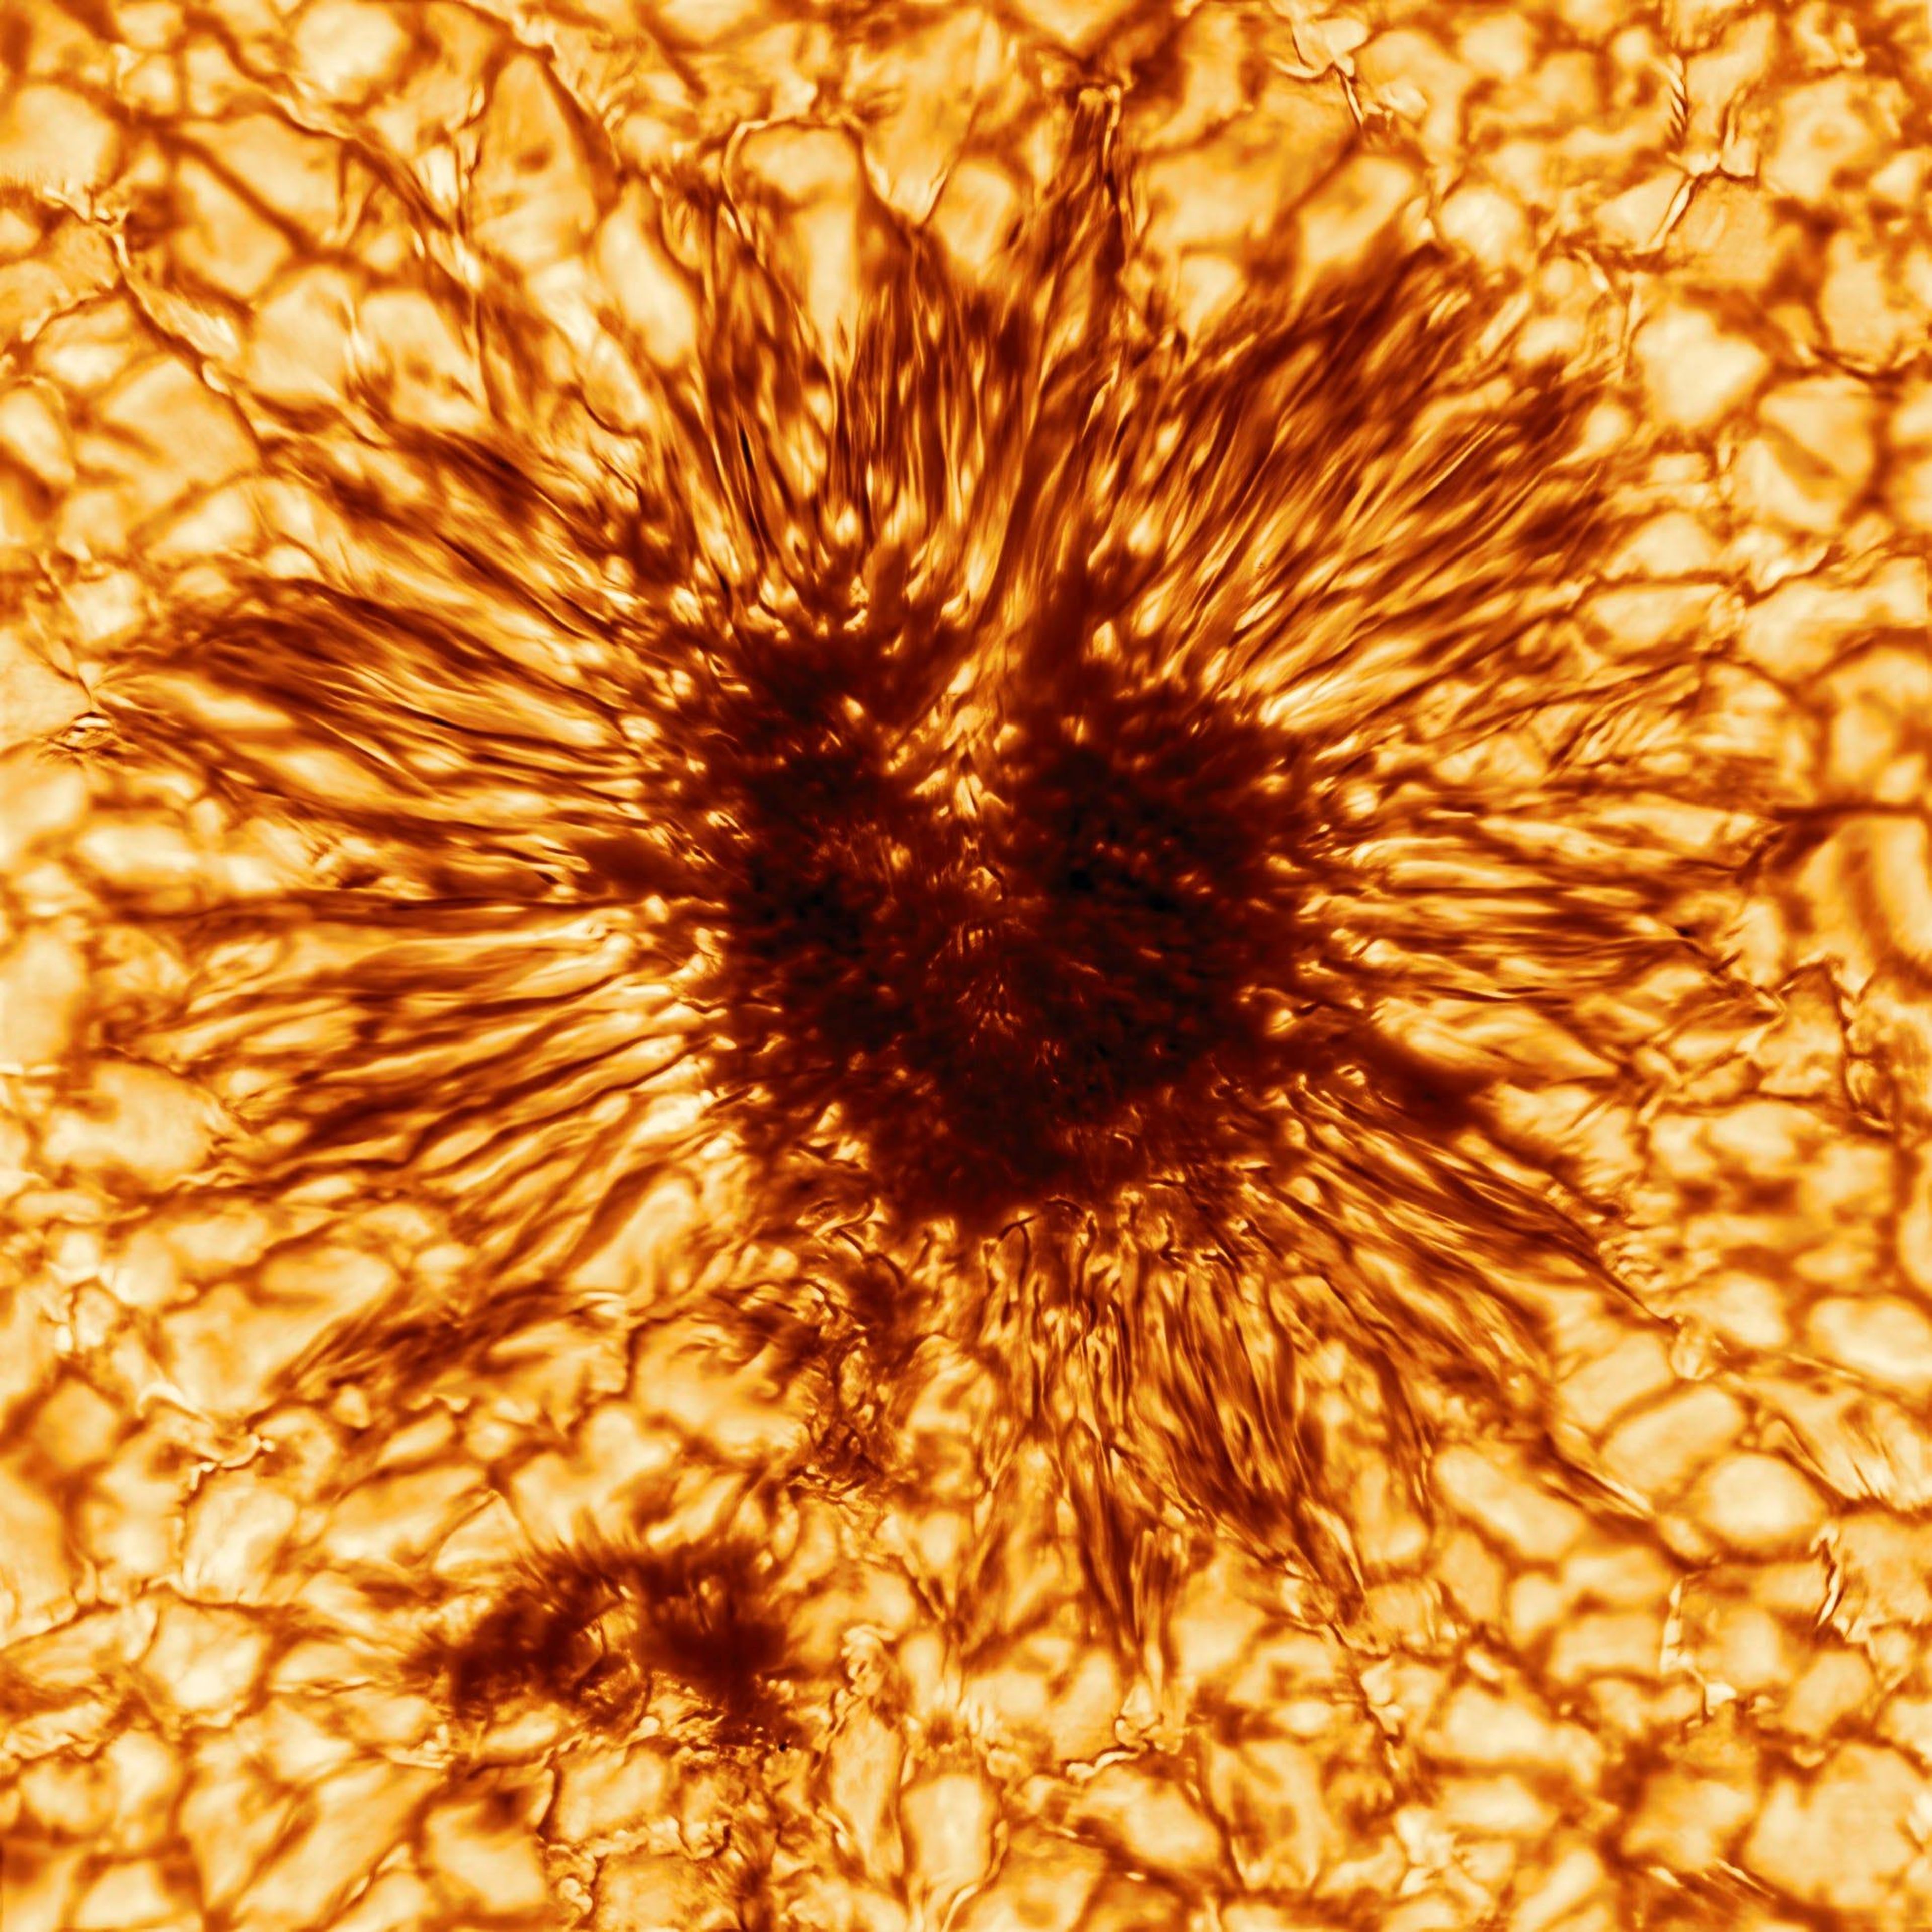 An image of a sunspot taken on January 28, 2020 by the NSF's Inouye Solar Telescope.